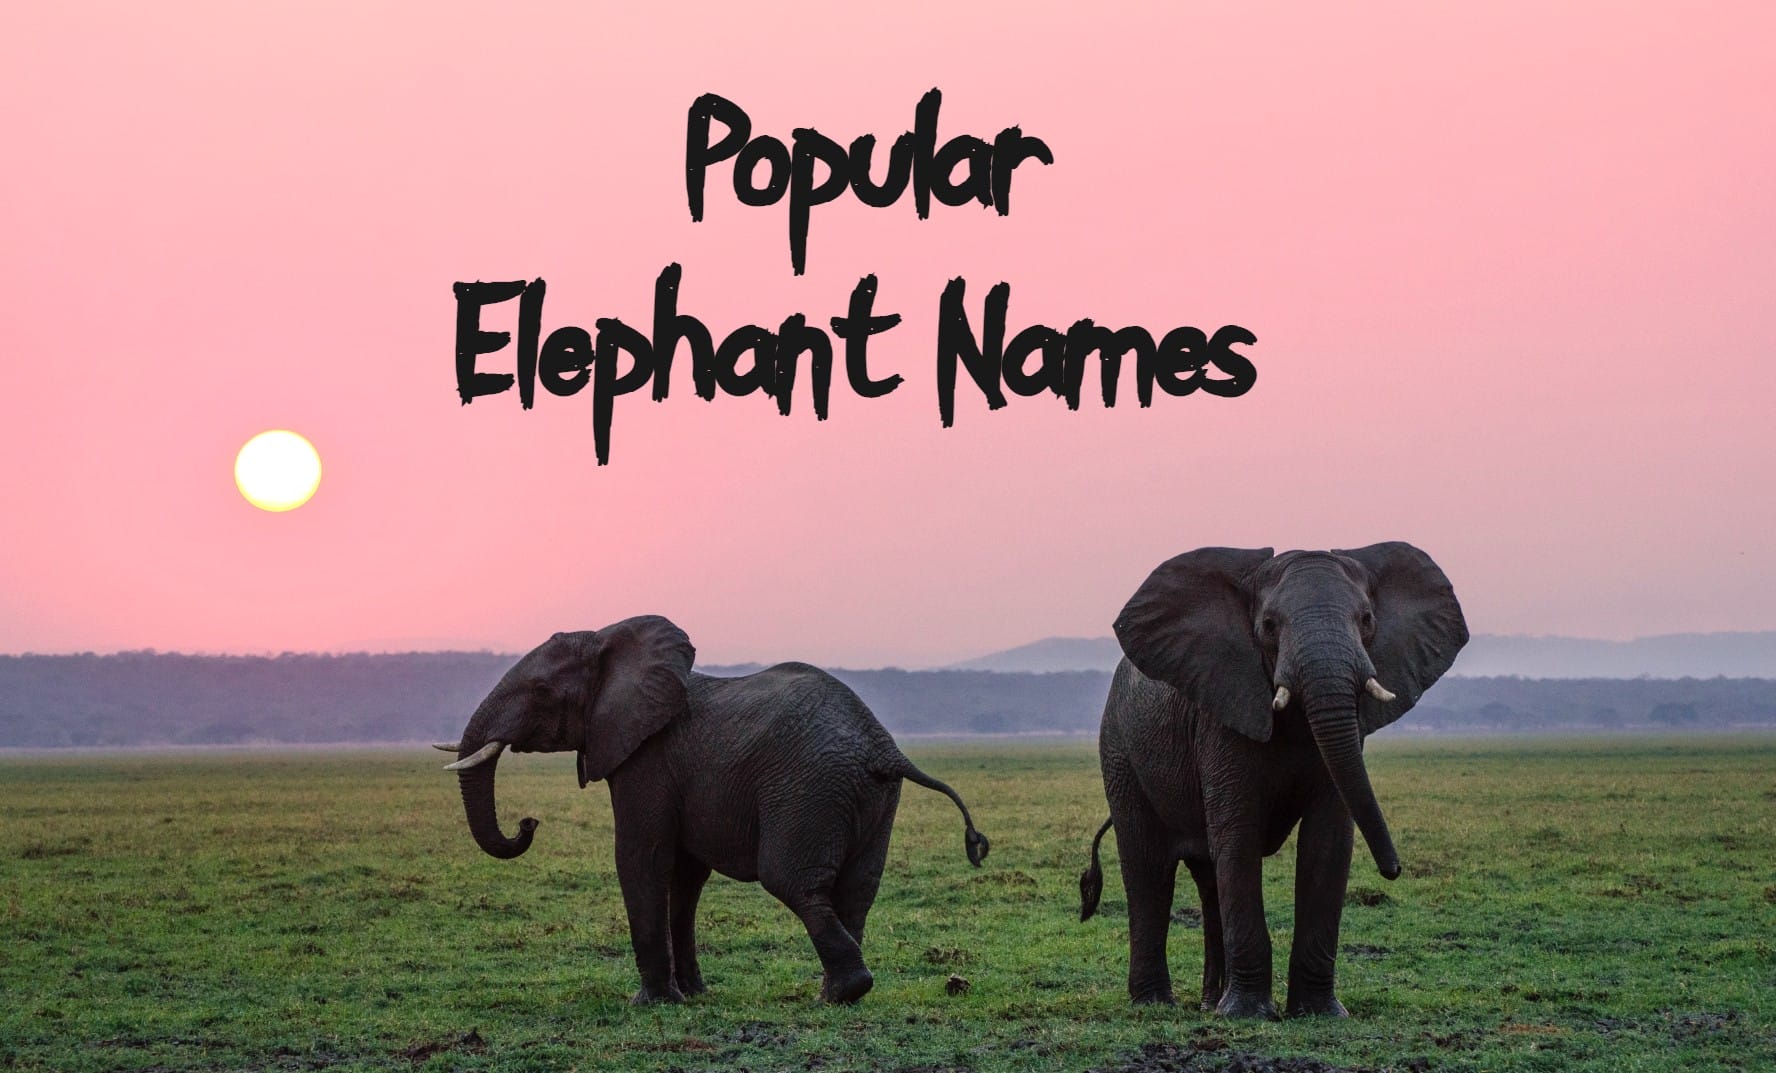 110+ Popular Elephant Names – With Cute & Famous Names